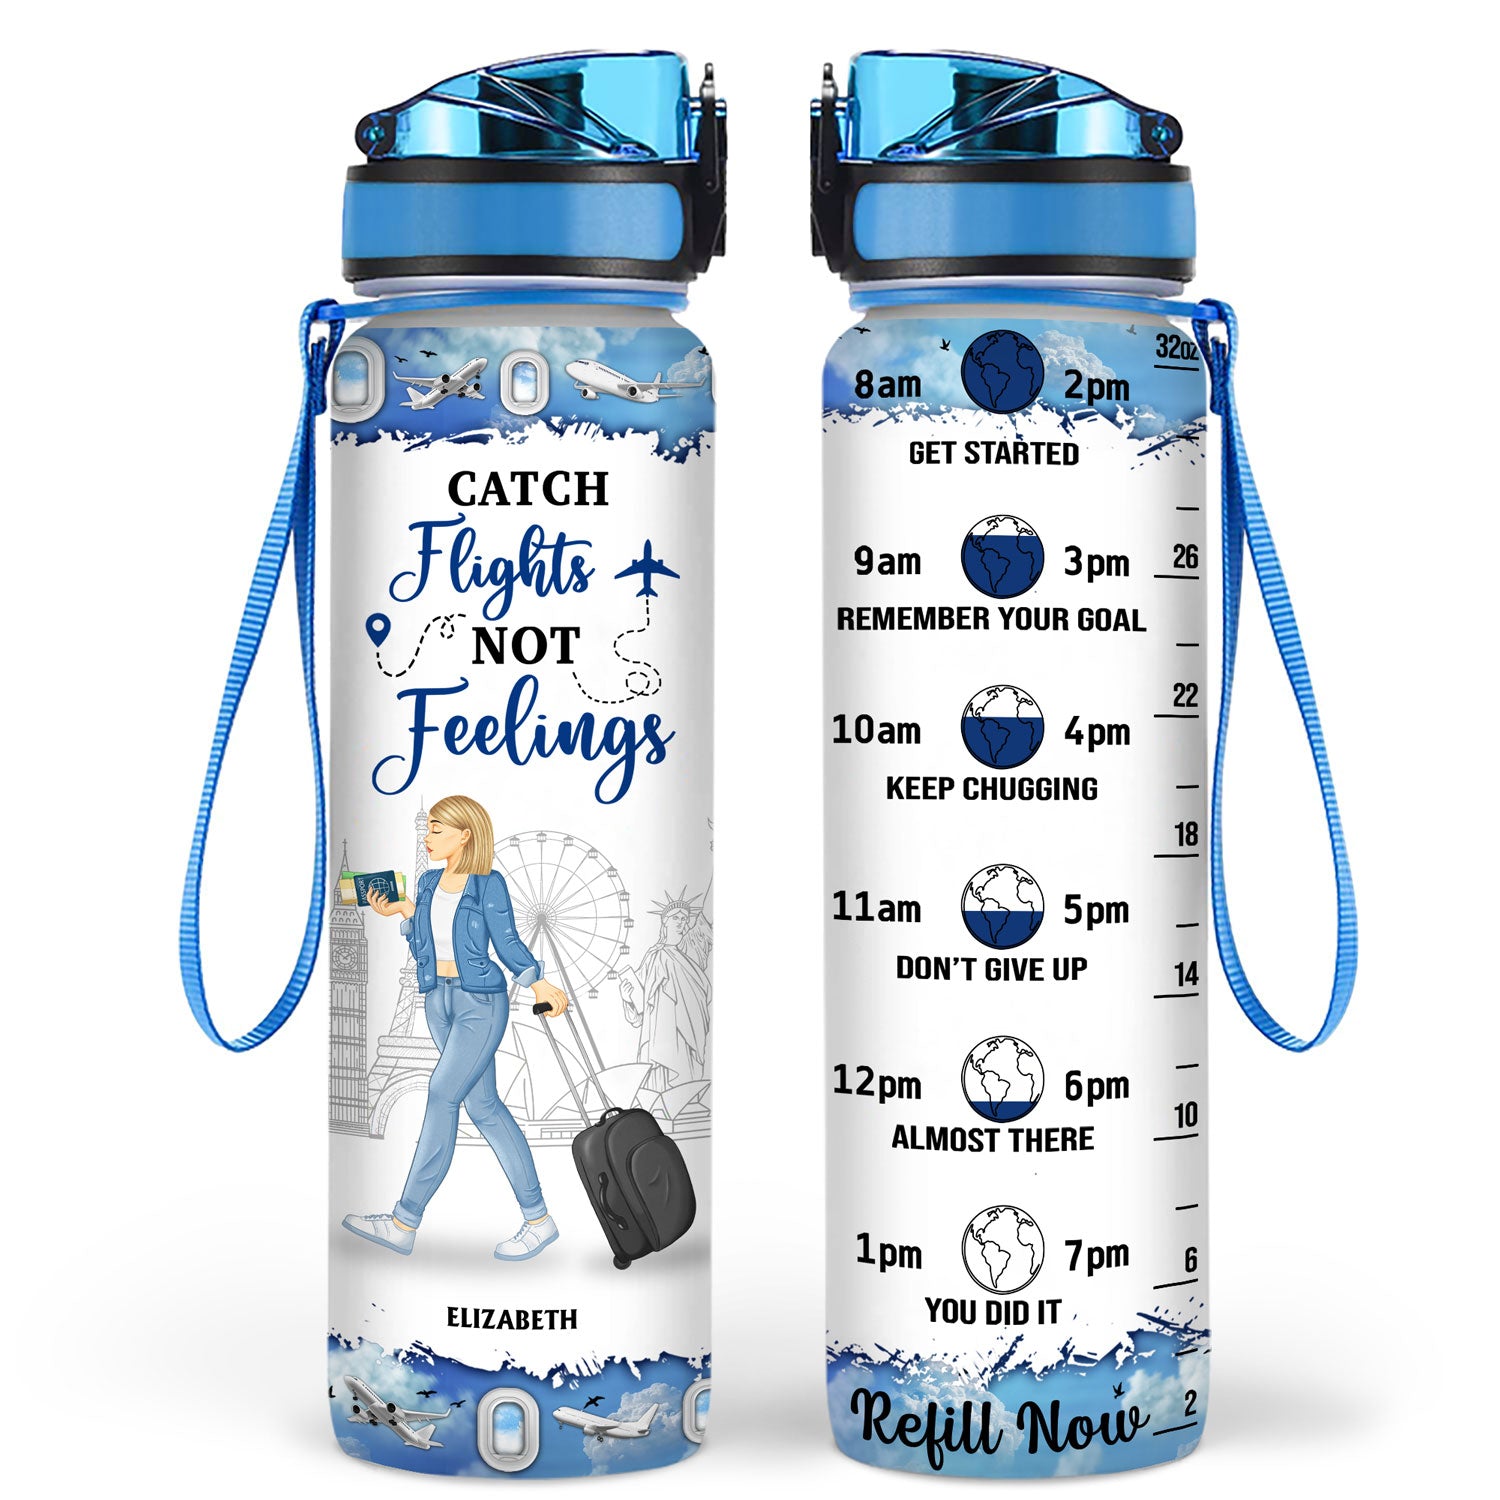 Catch Flights Not Feelings - Birthday Gift For Him, Her, Trippin', Vacation Lovers - Personalized Custom Water Tracker Bottle